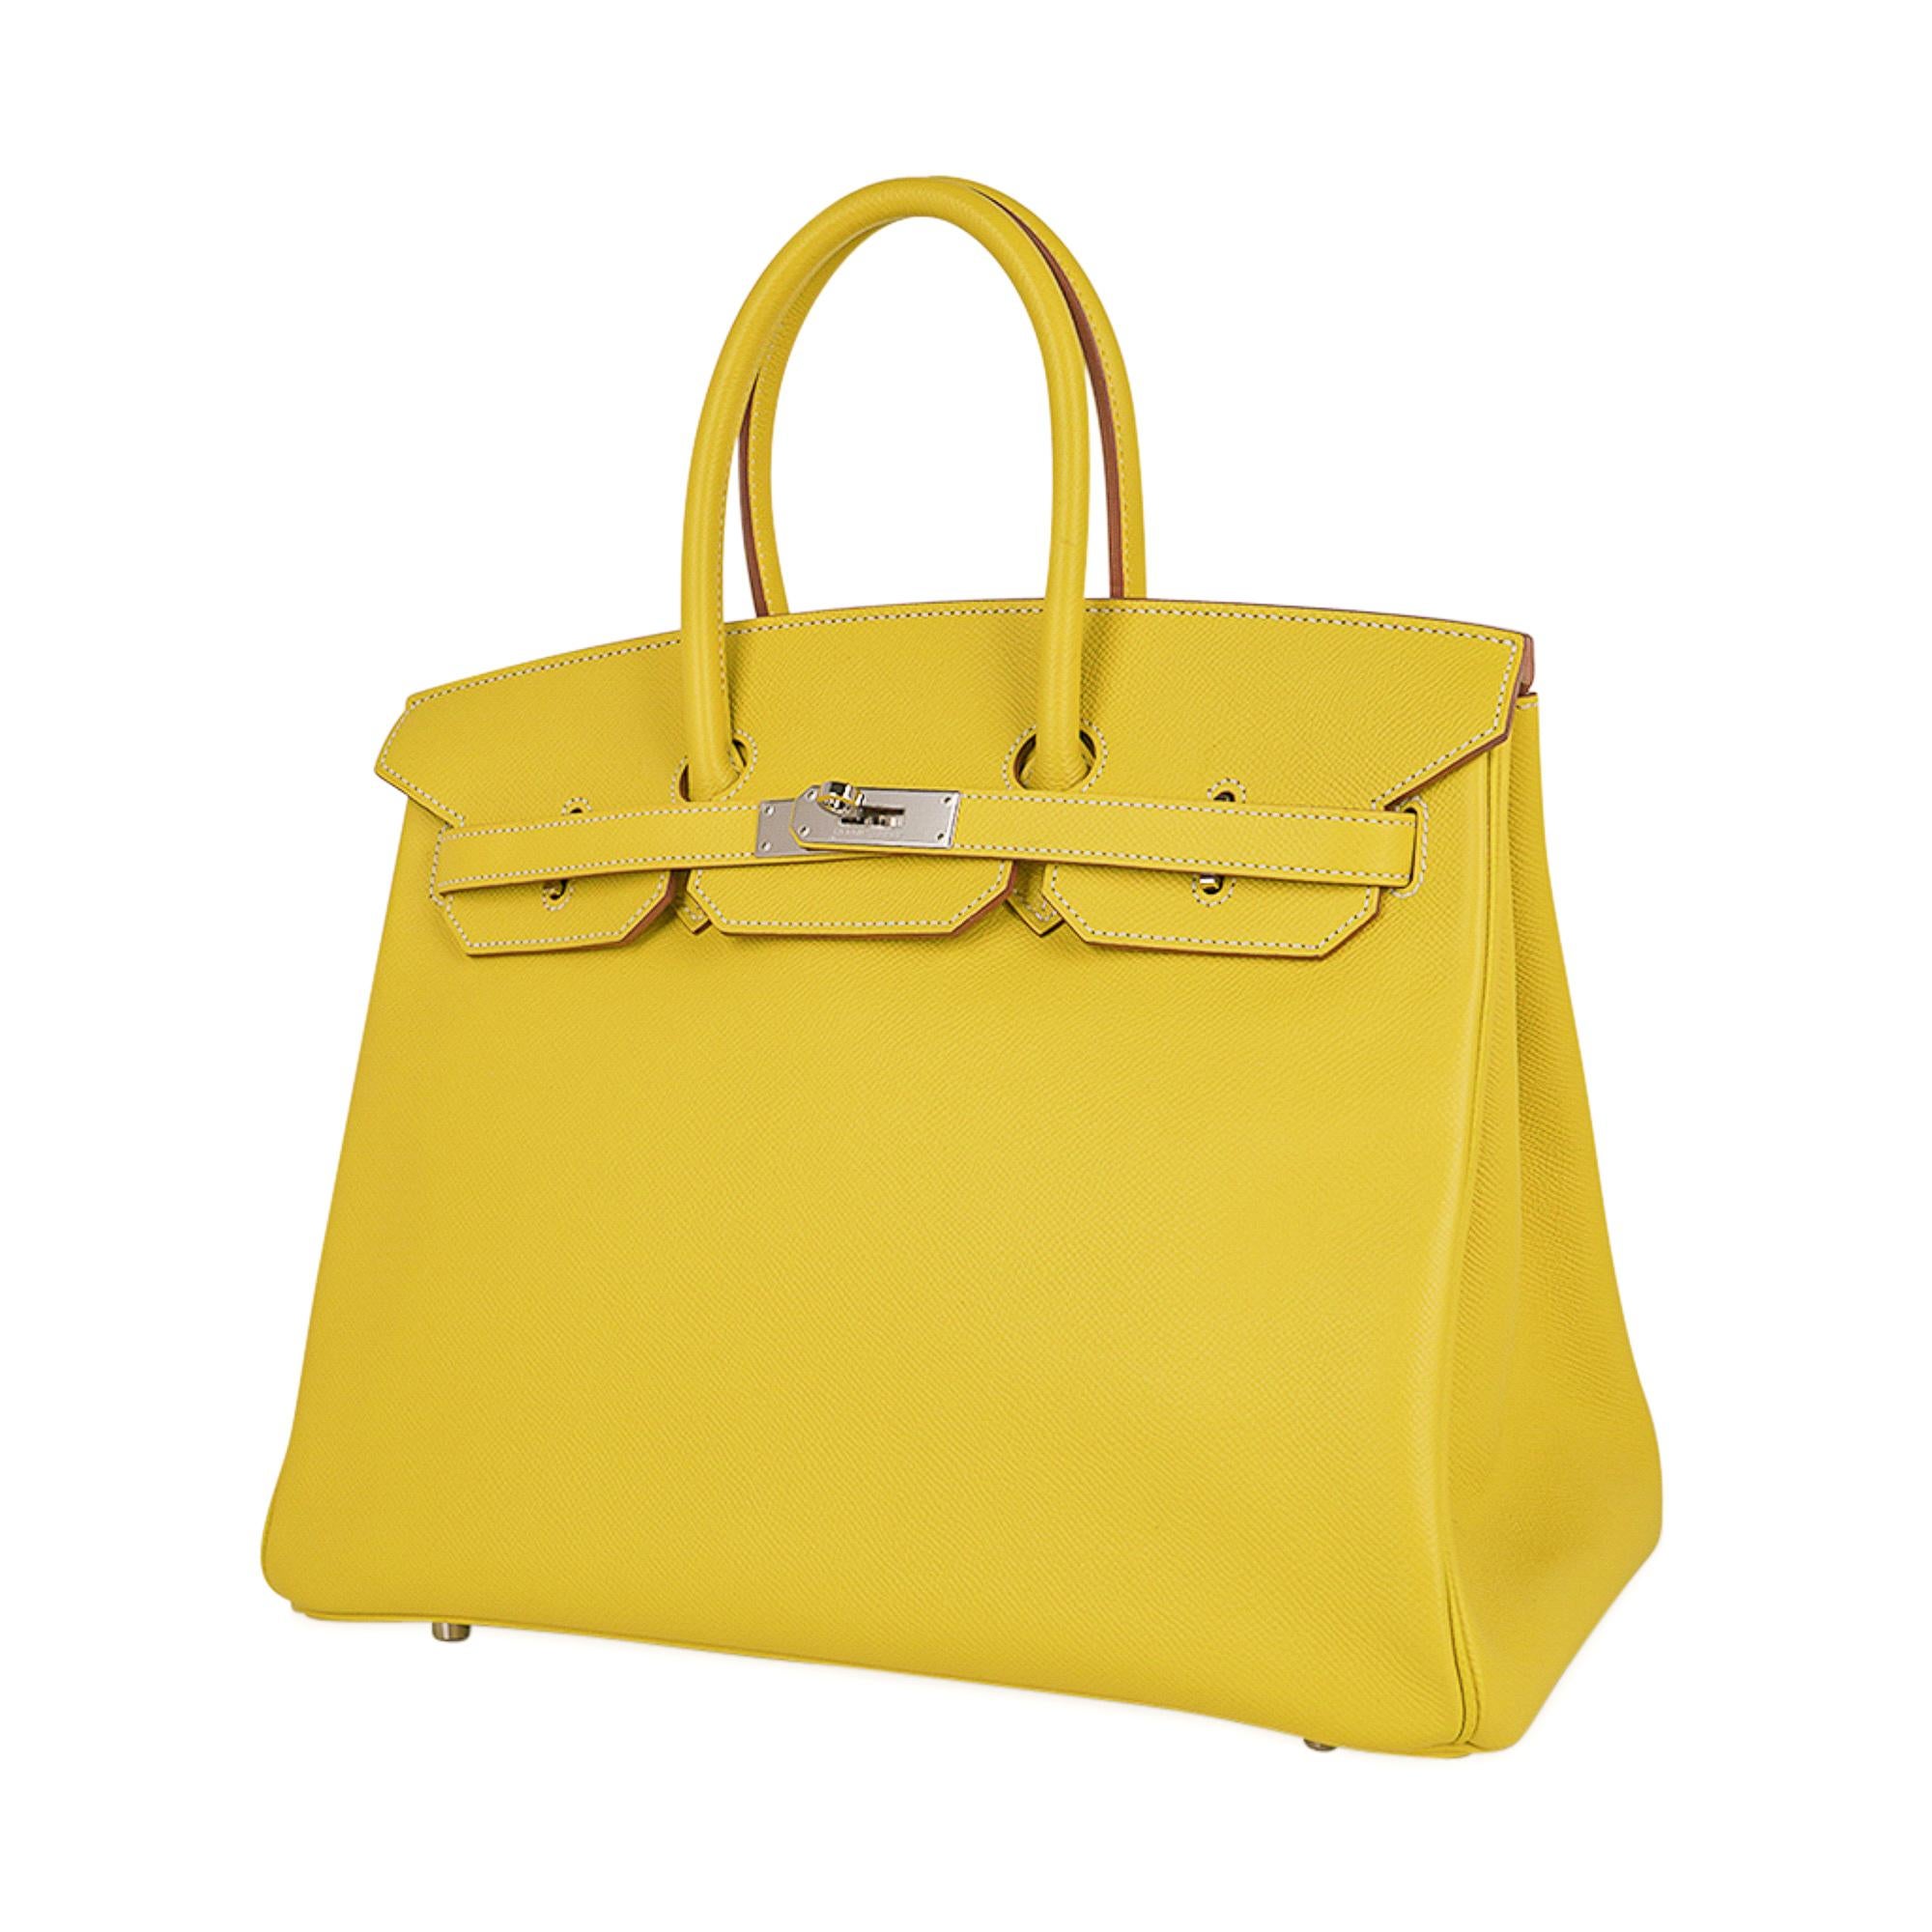 Mightychic offers a rare Limited Edition Candy Hermes Birkin 35 bag featured Lime with Gris Perle interior.
Fresh with palladium hardware.
Epsom leather maintains the shape of the bag is is lighter in weight.
This yellow Birkin bag is a jewel to add